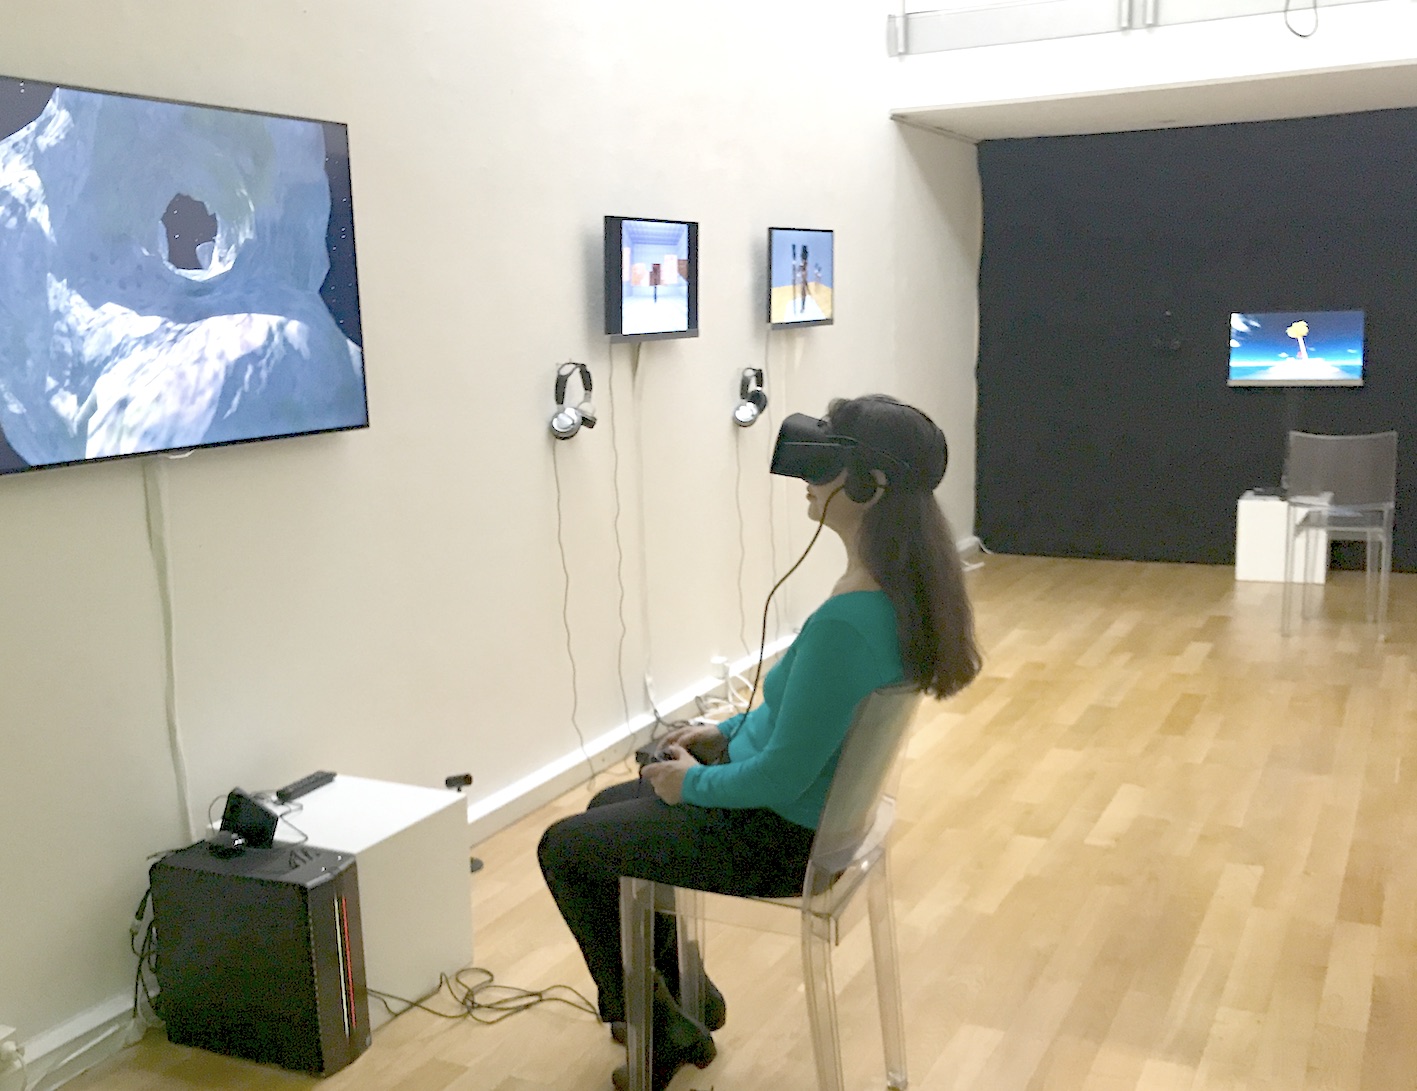 Exhibition view RESET III AND VIRTUAL REALITY, photo by Nathan Ishar / Artworks: DiMoDA and videos by Gazira Babeli and Patrick Lichty